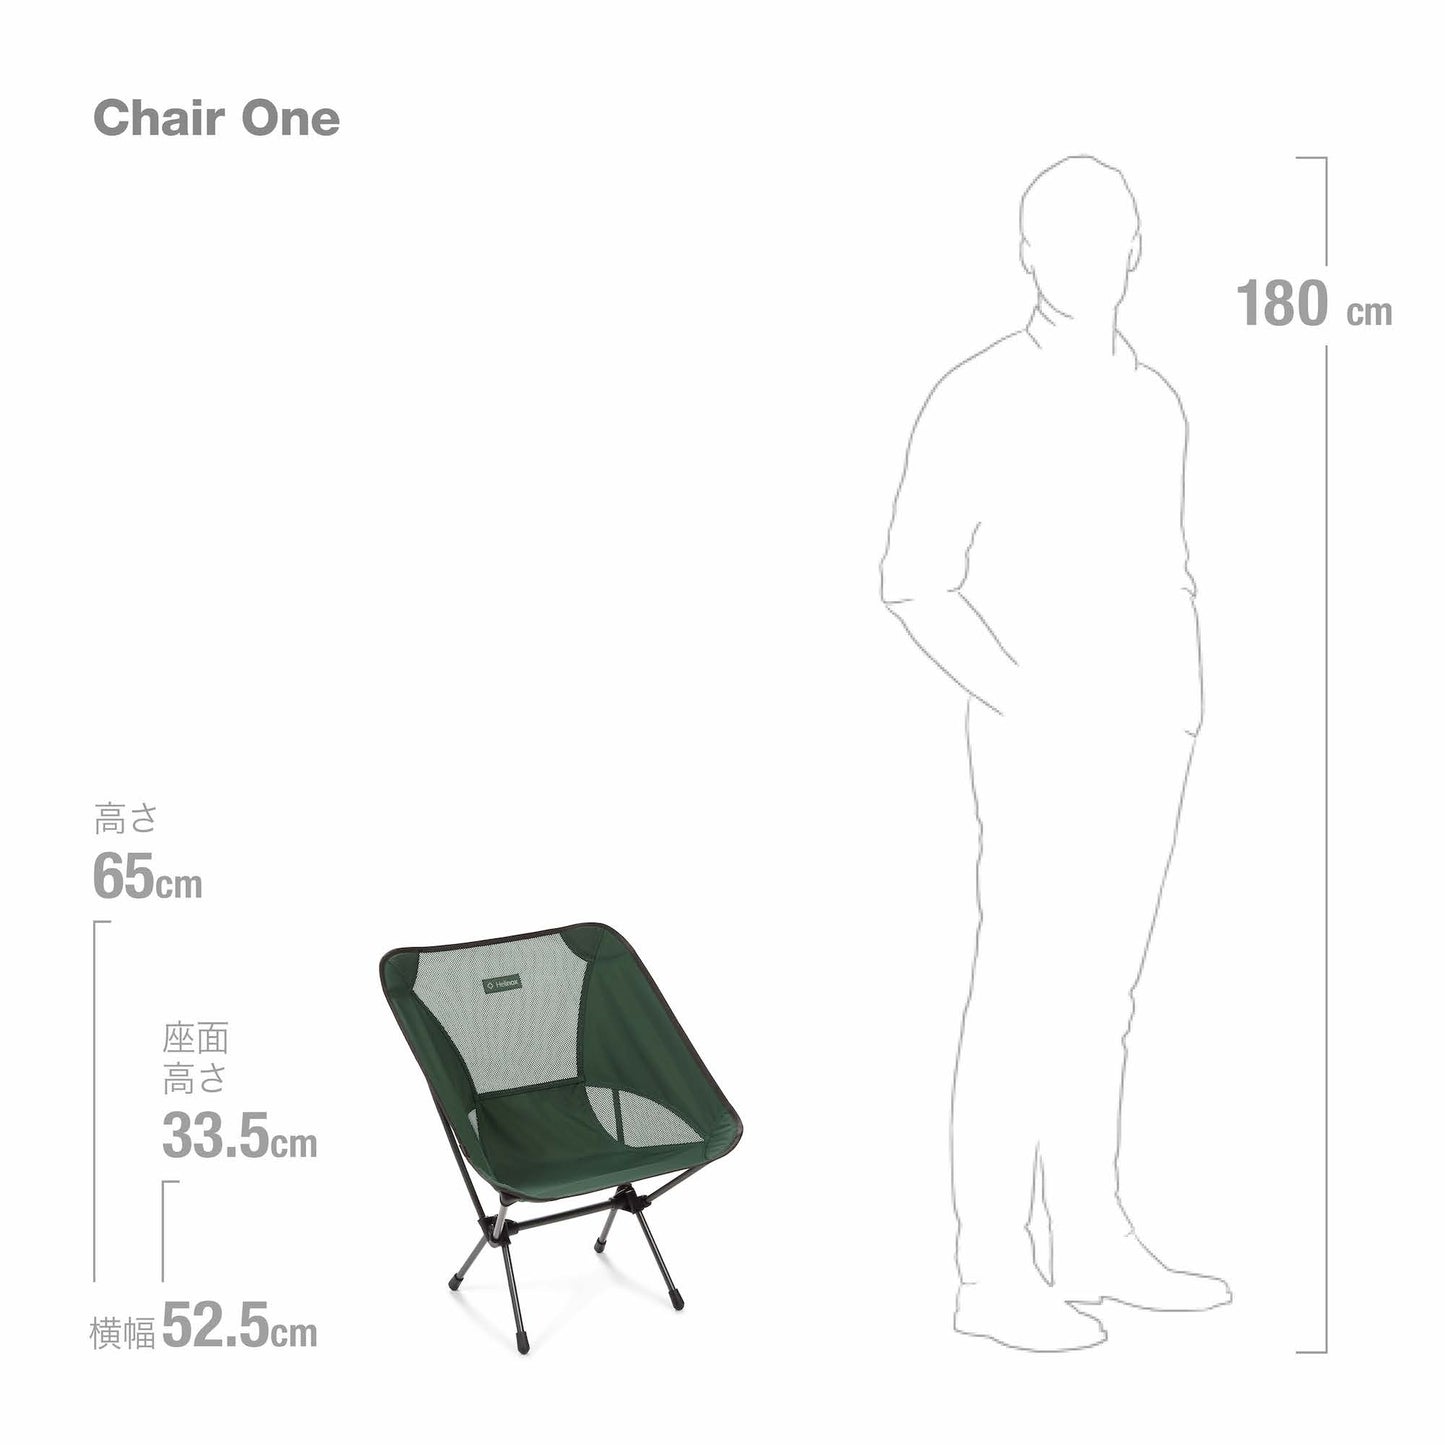 Chair One - Forest Green